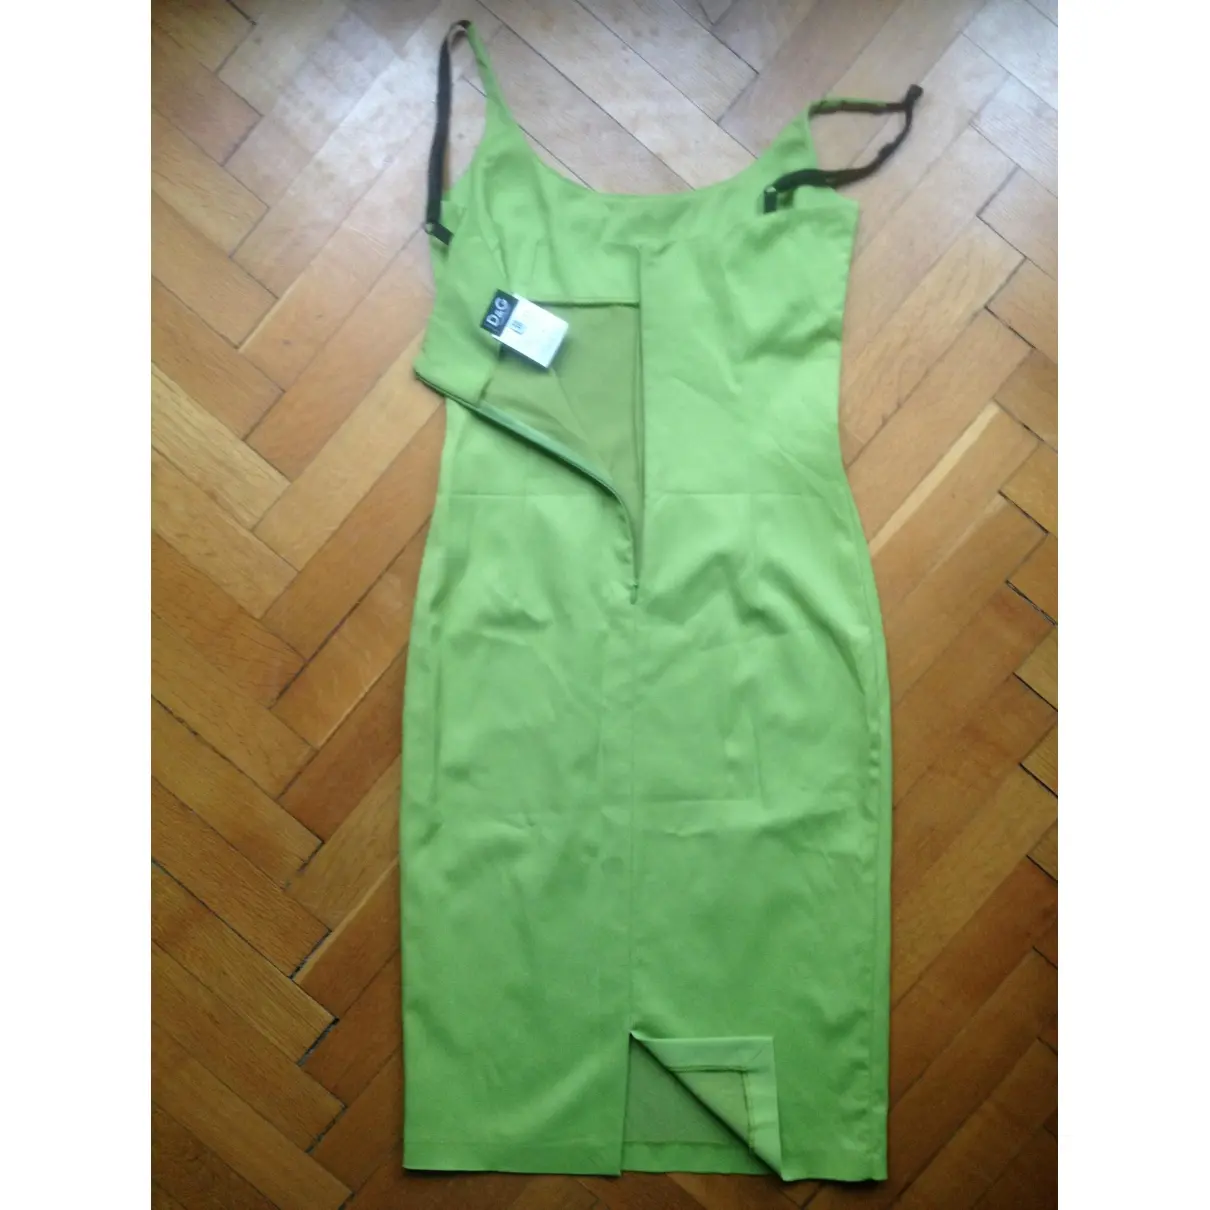 D&G Green Synthetic Dress for sale